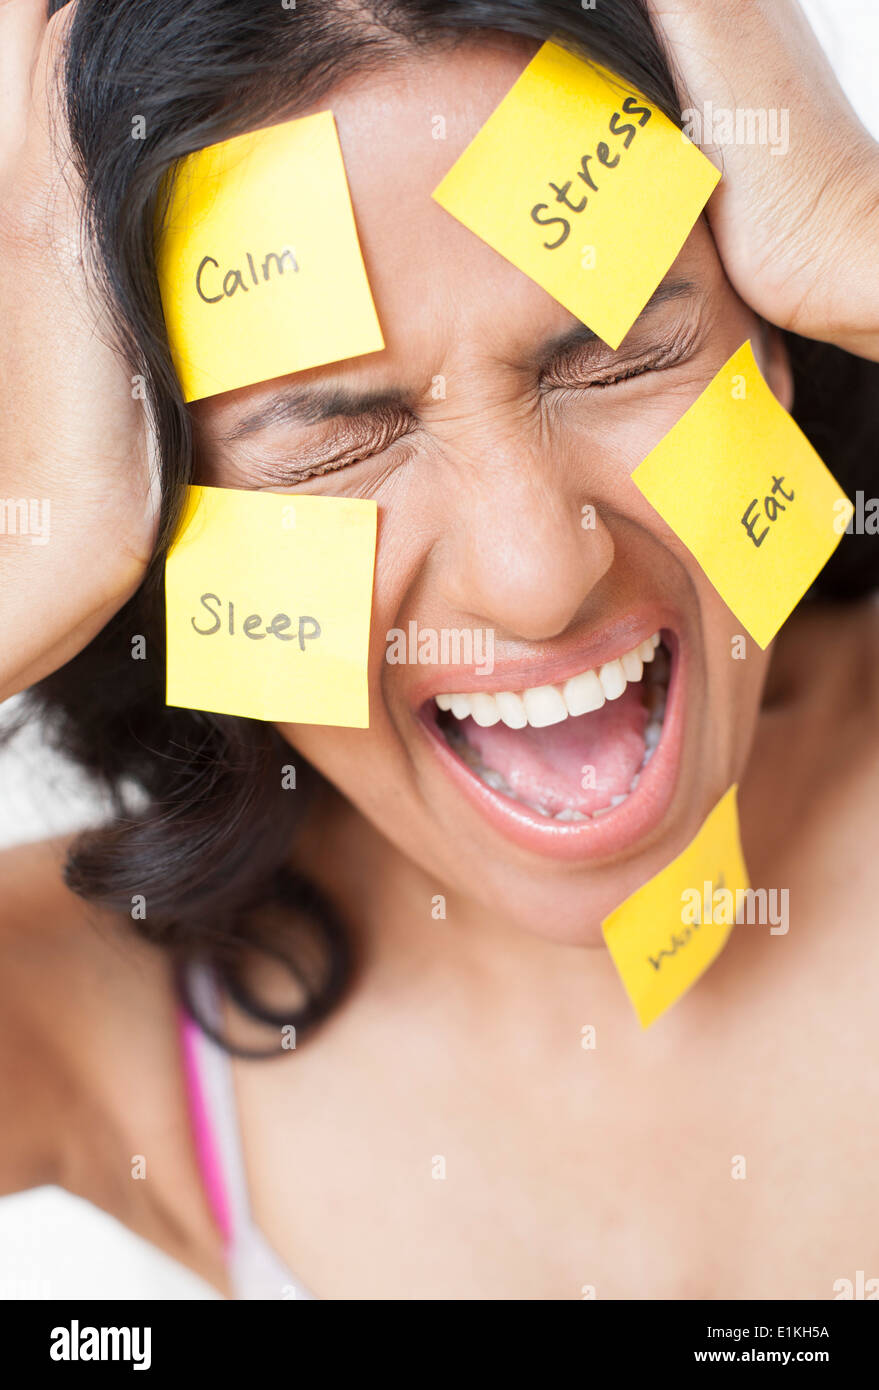 MODEL RELEASED Frustrated woman with adhesive notes stuck to her face. Stock Photo